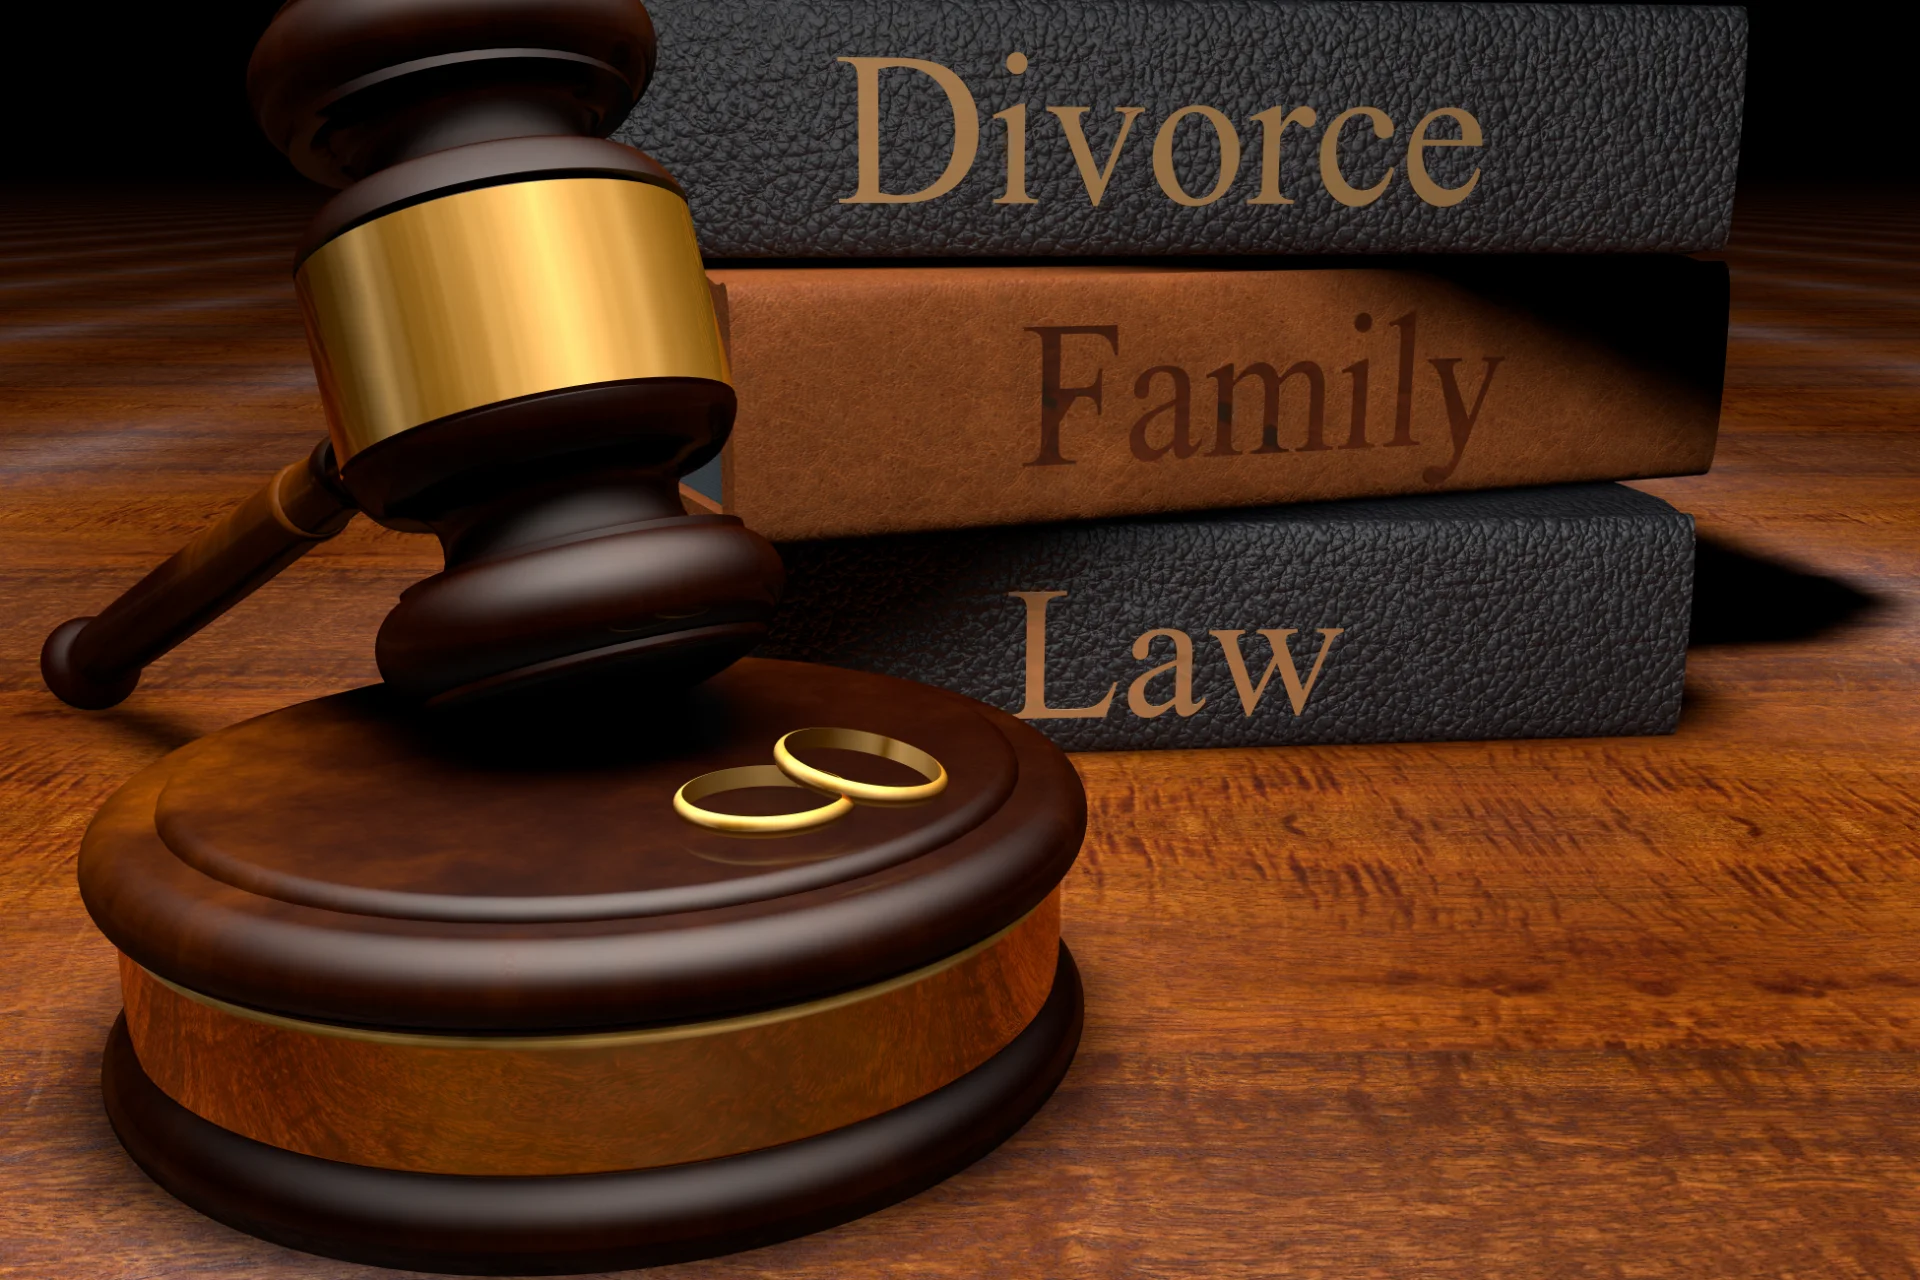 Gavel and divorce books in Florida